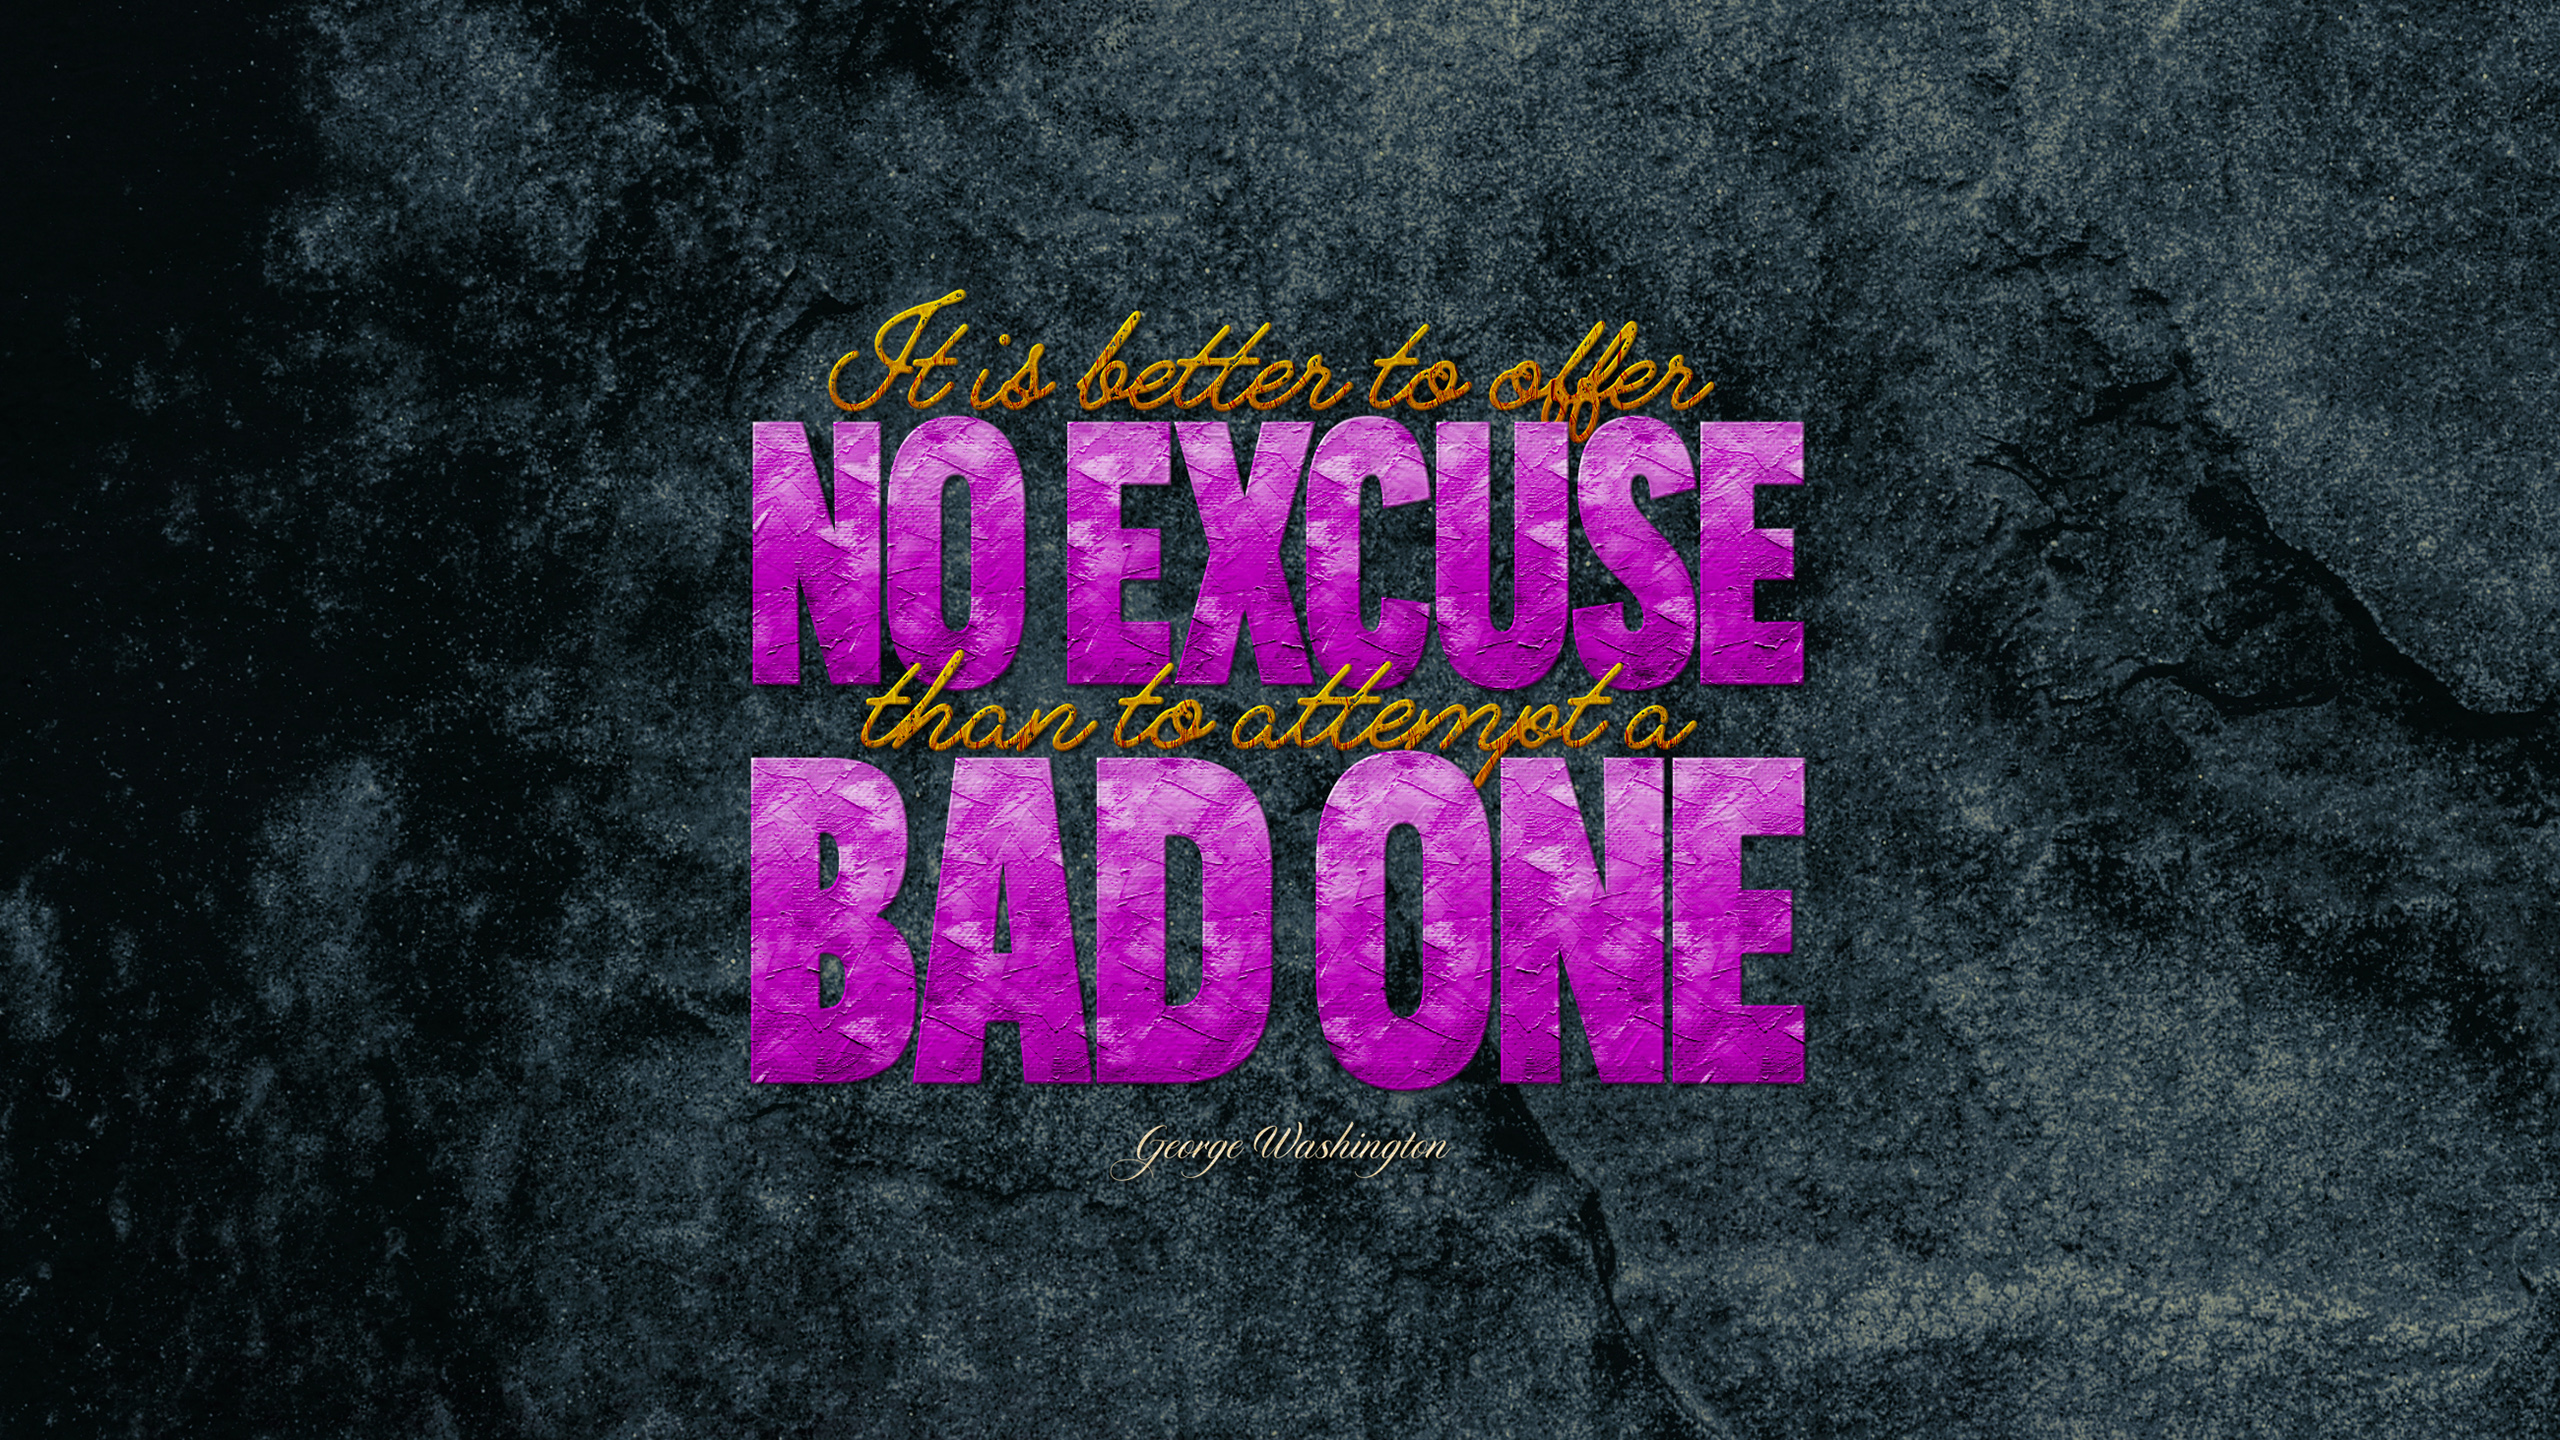 Offer no excuse for Bad one Quote Wallpapers